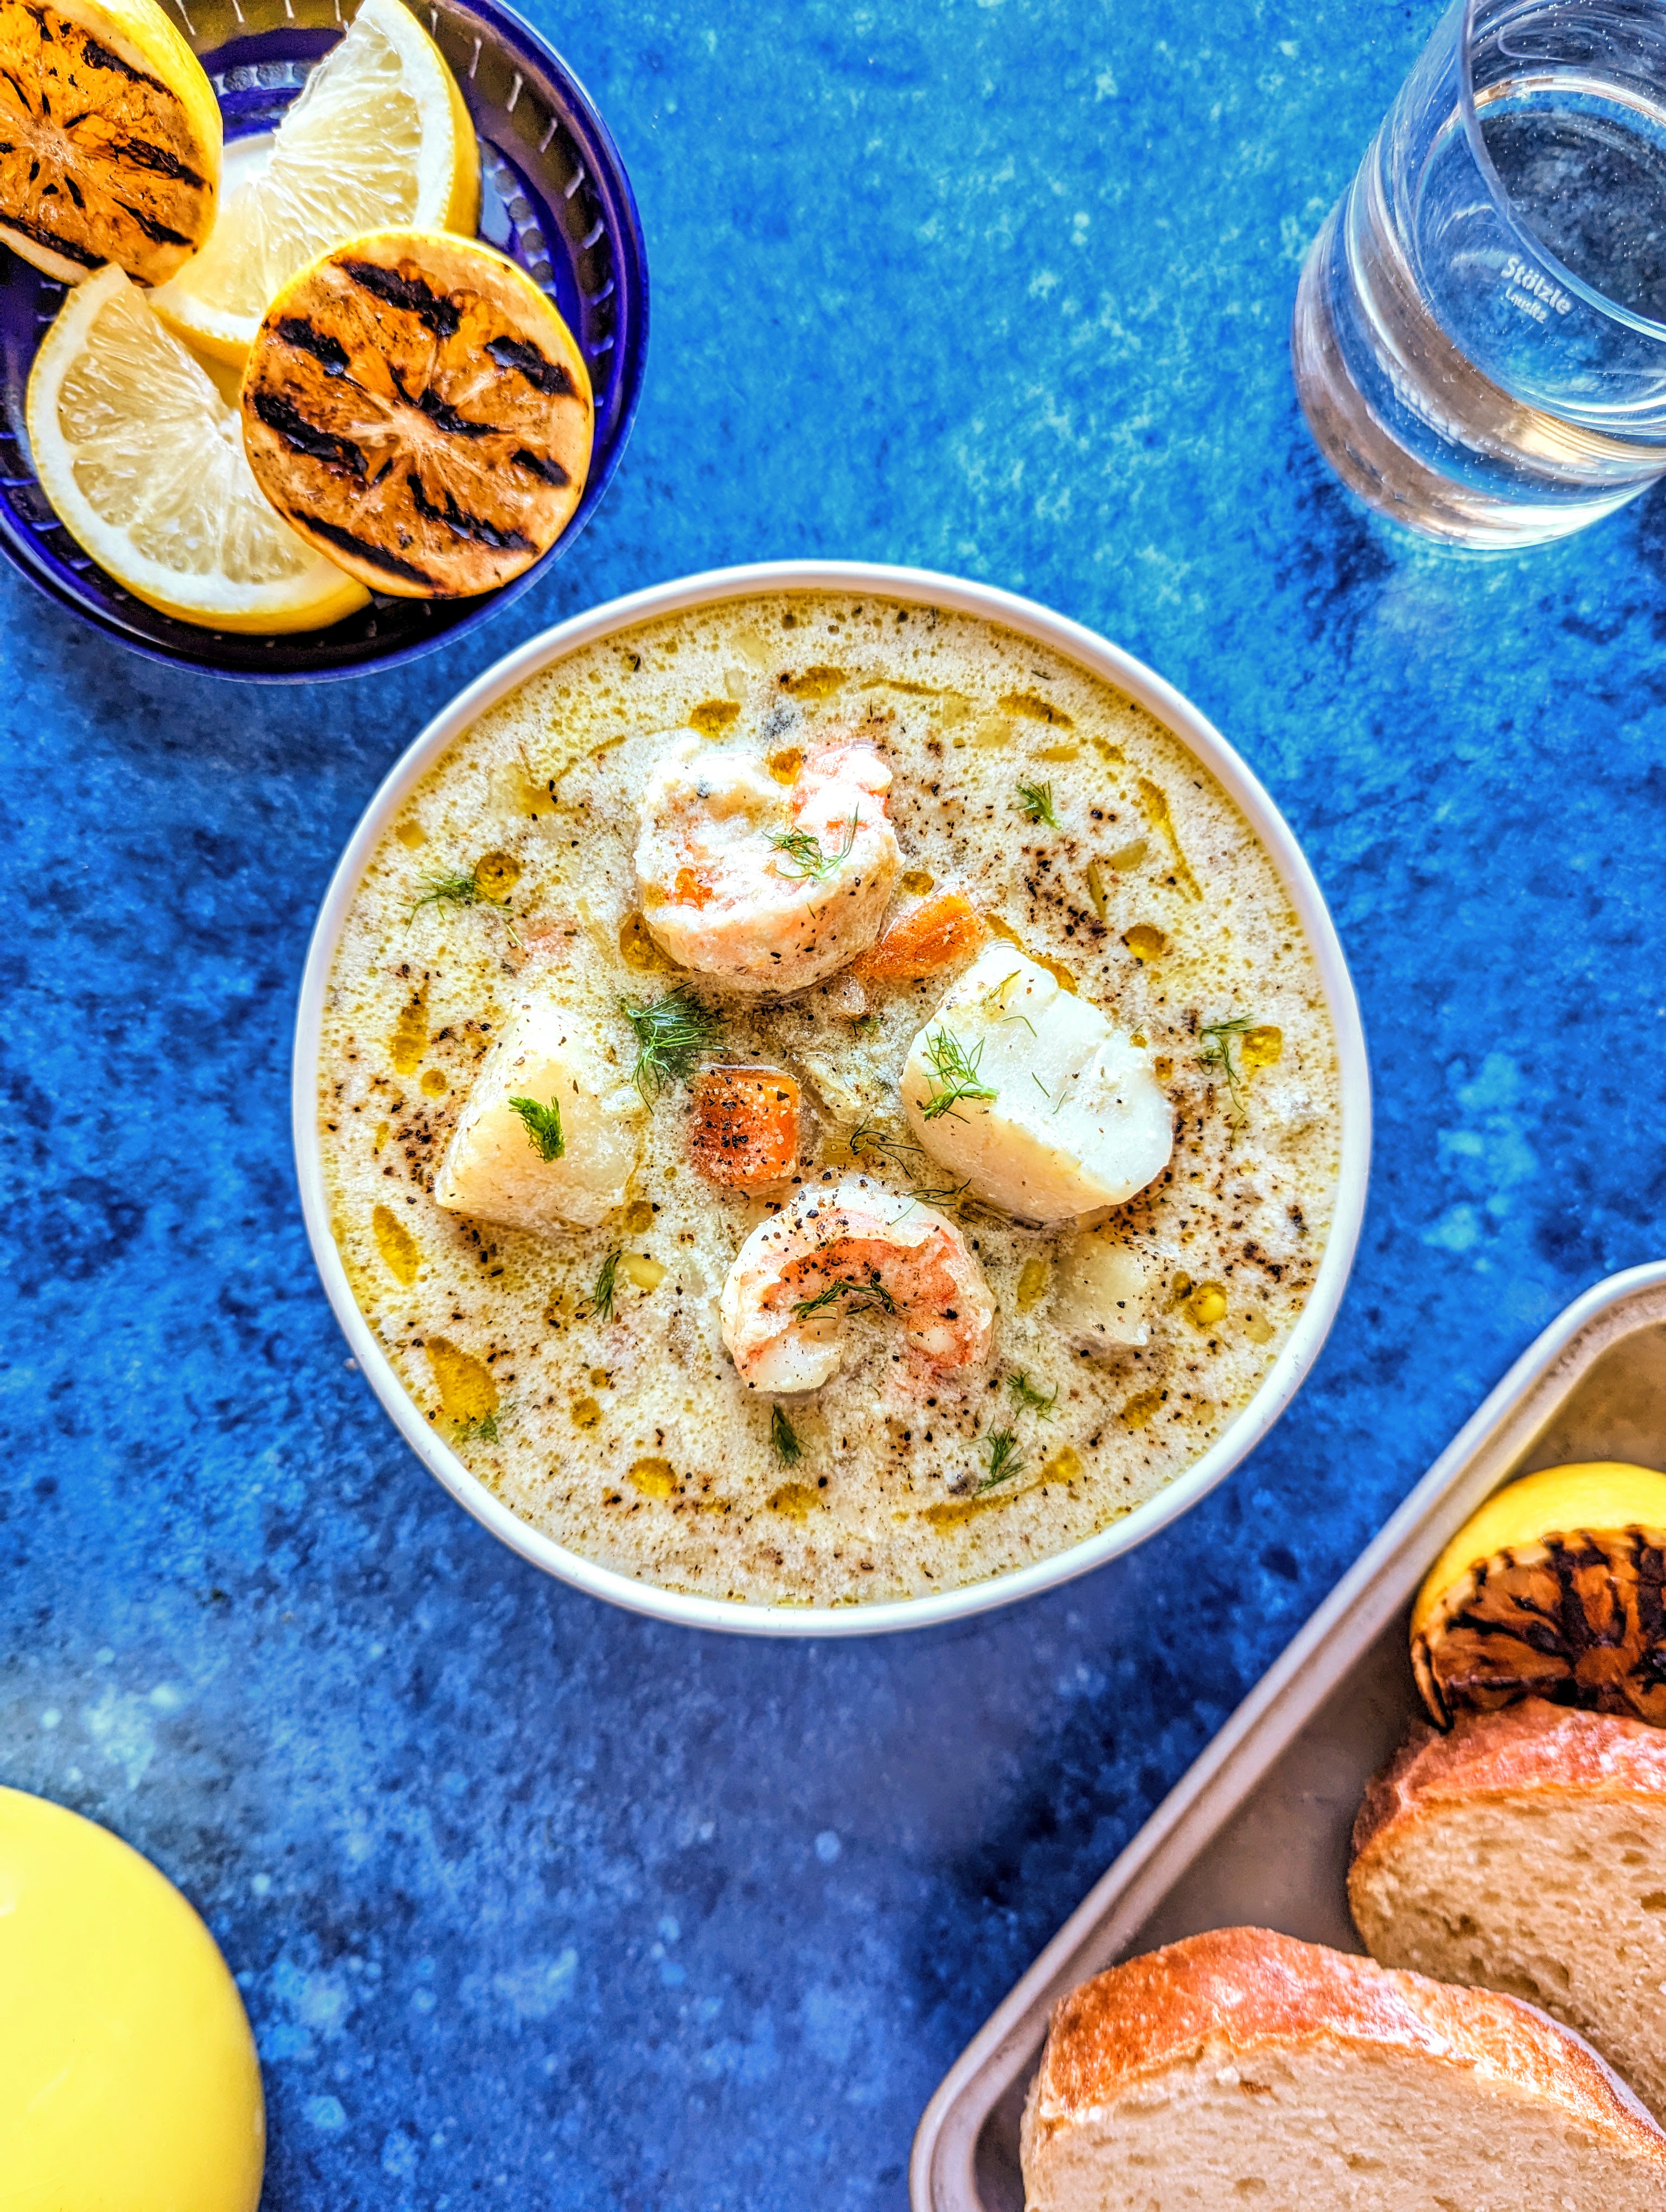 A bowl of hearty seafood chowder with grilled lemon and toasted bread.